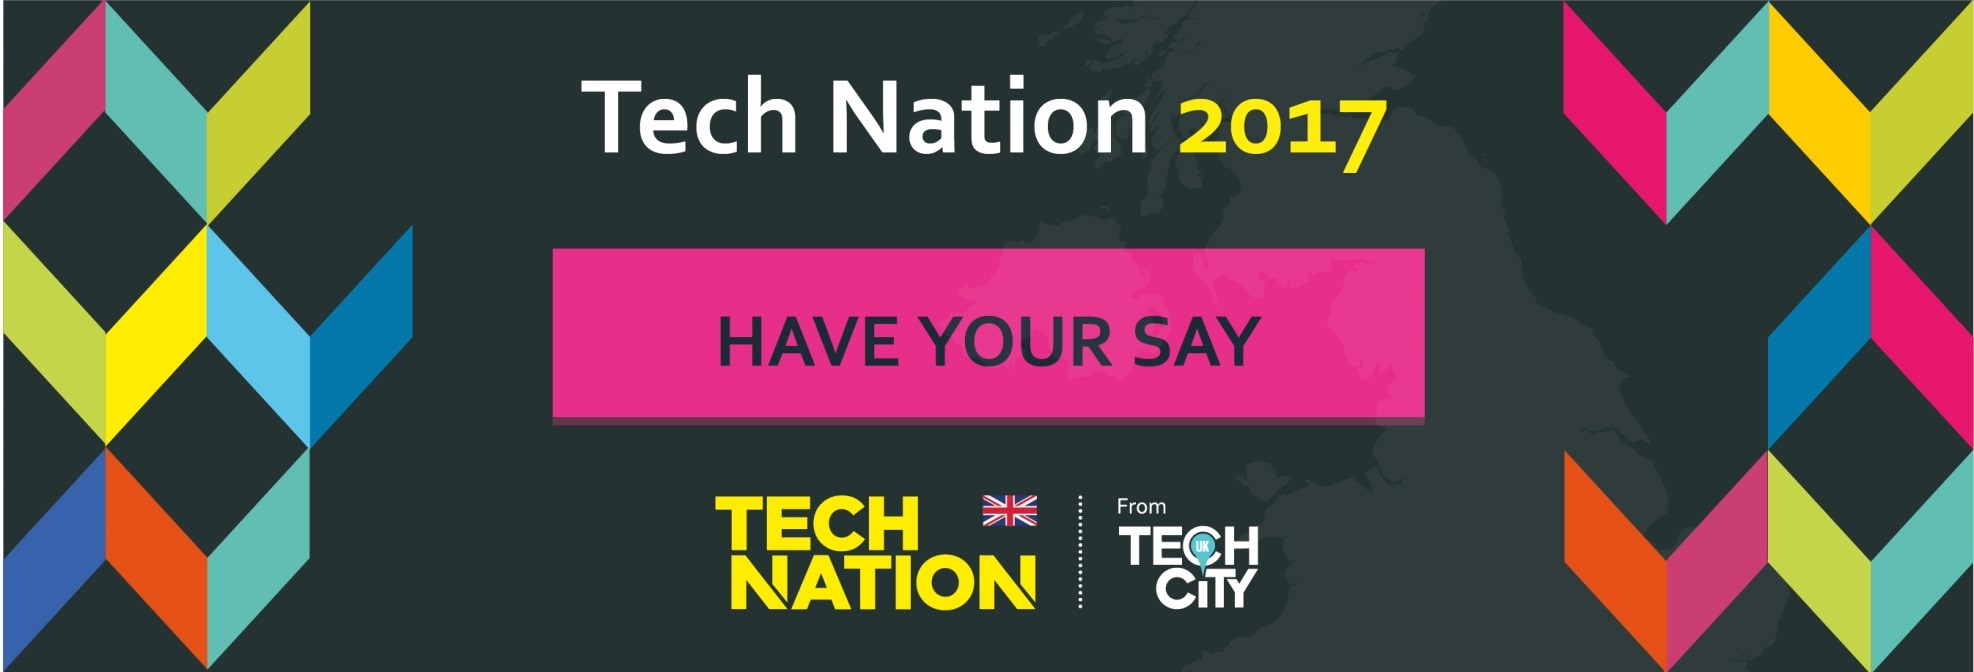 Annual Survey Released to Hear from the UK Tech Community